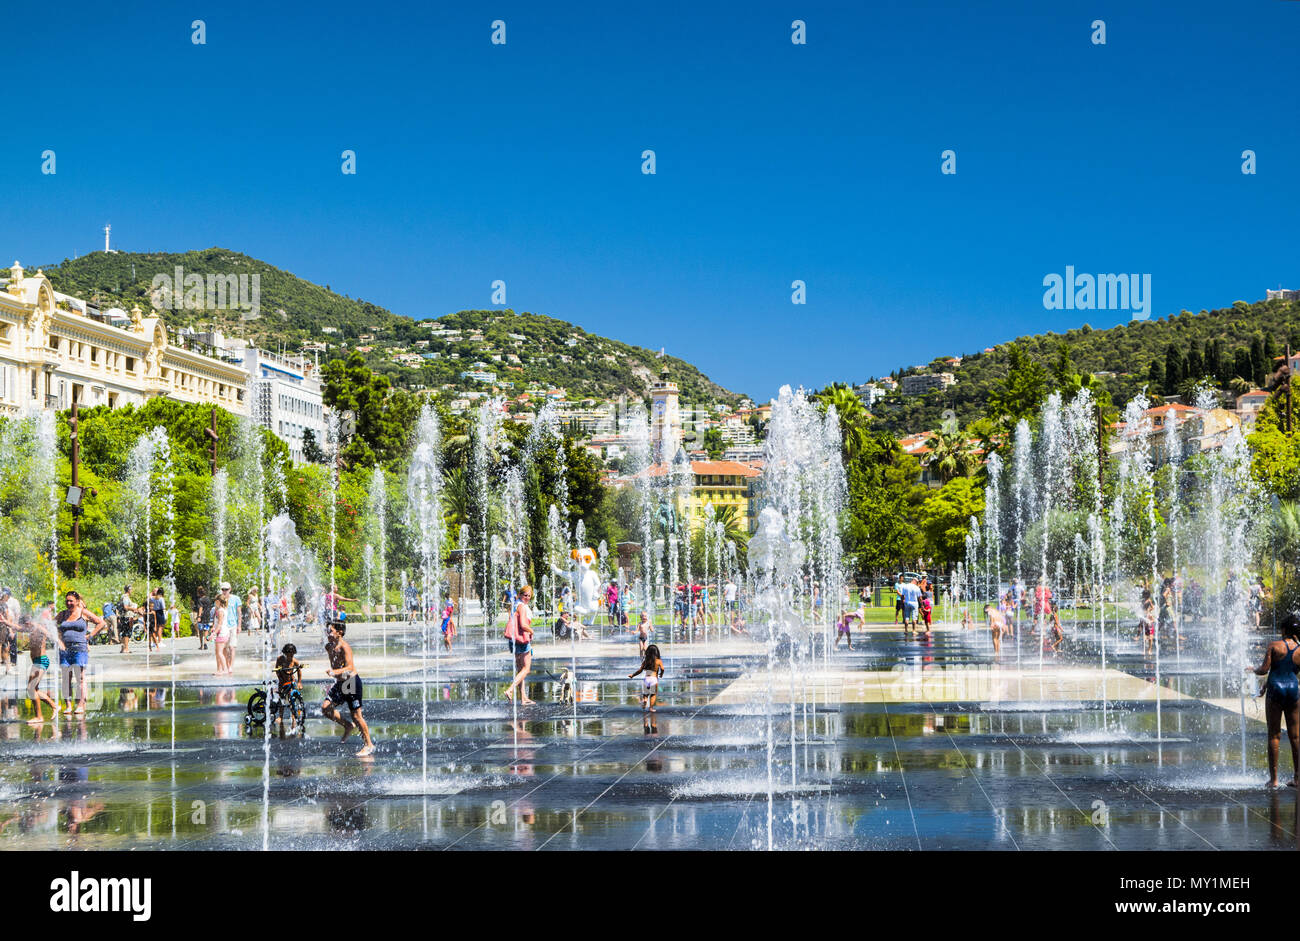 Central park fountains in Nice, France Stock Photo - Alamy